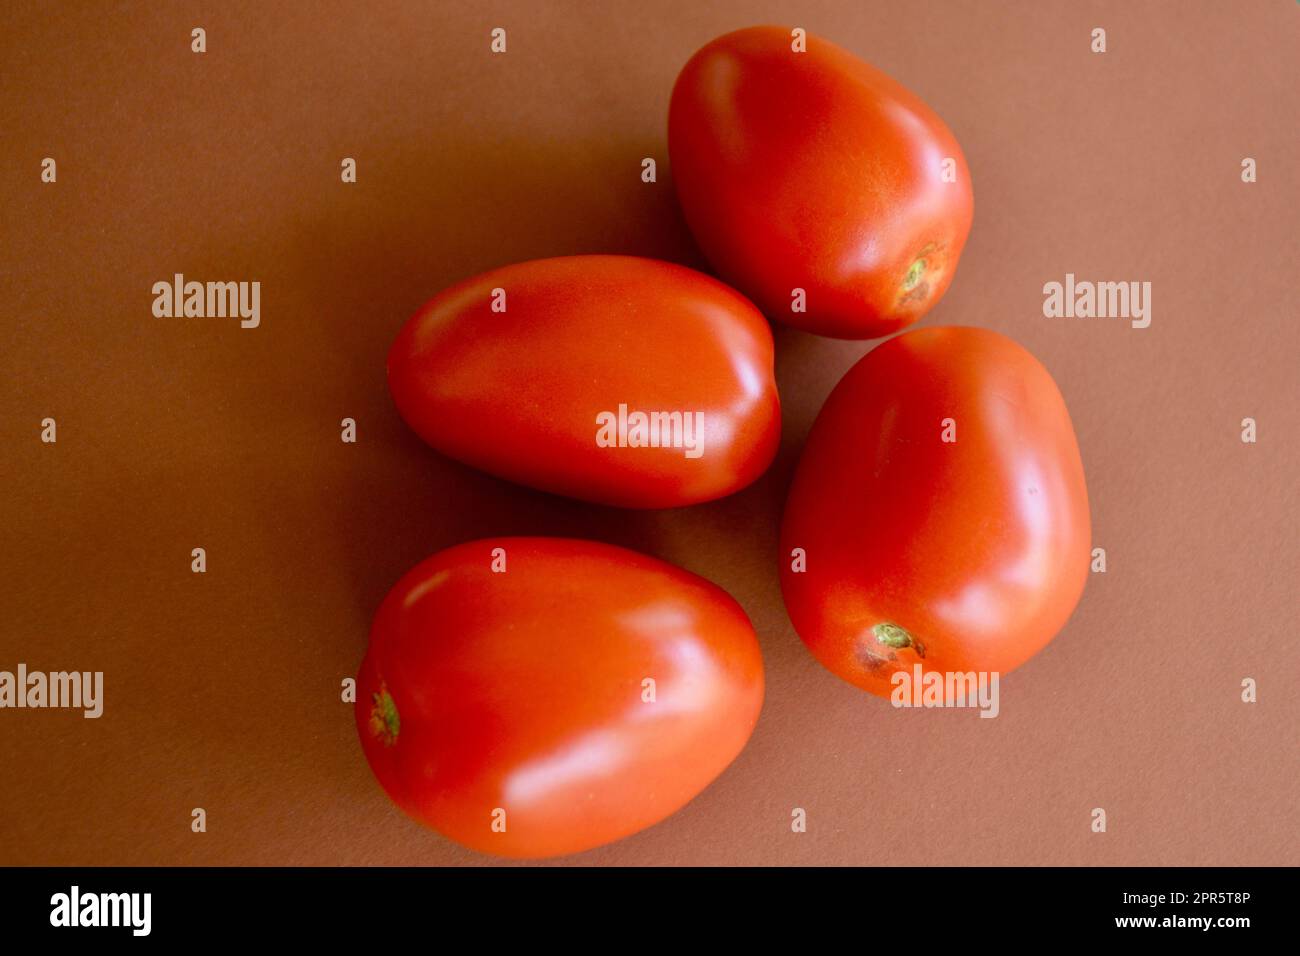 Roma tomatoes on a simple background Stock Photo